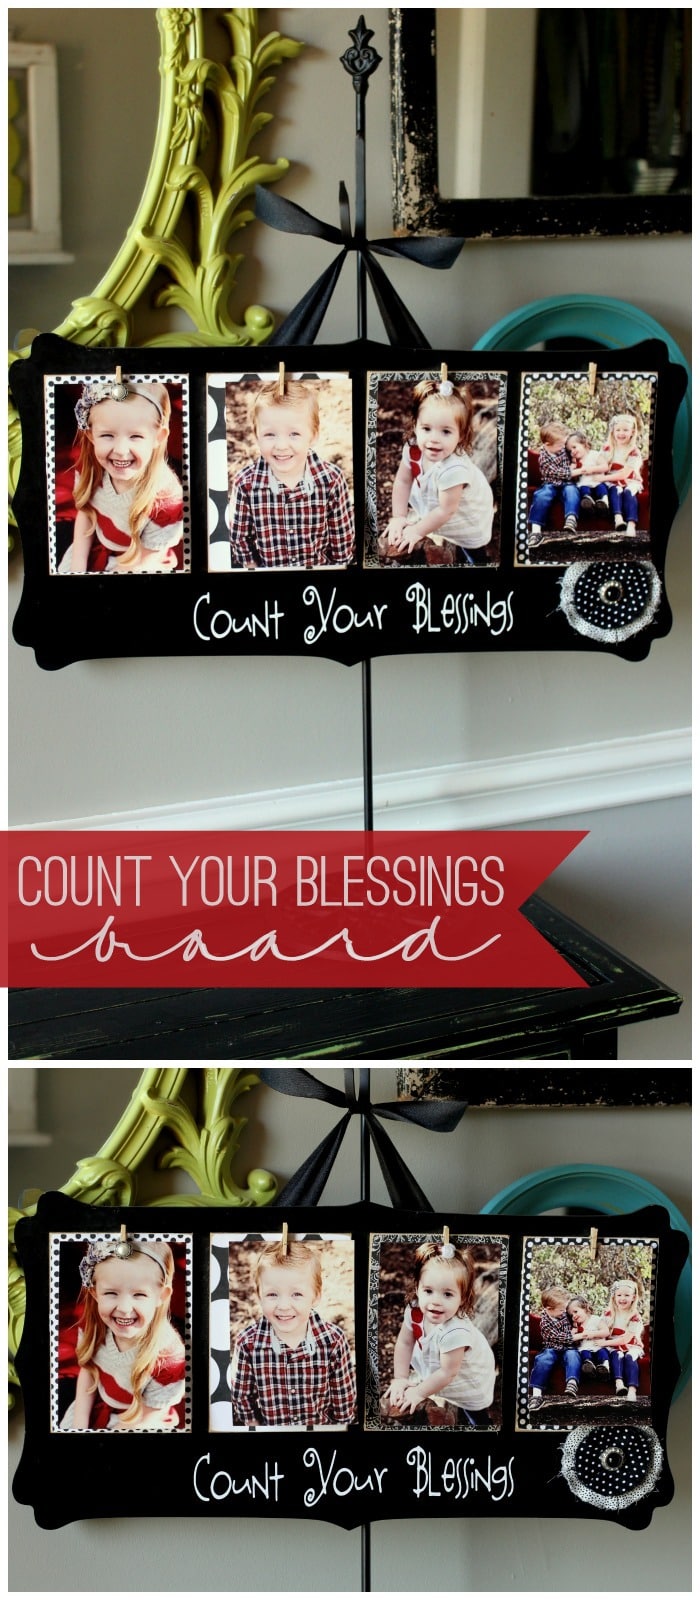 Cute and Inexpensive Count Your Blessings Board - great gift idea! Tutorial on { lilluna.com } Supplies include bead board, paint, clothespins, hard wood, fabric flowers, and pictures.